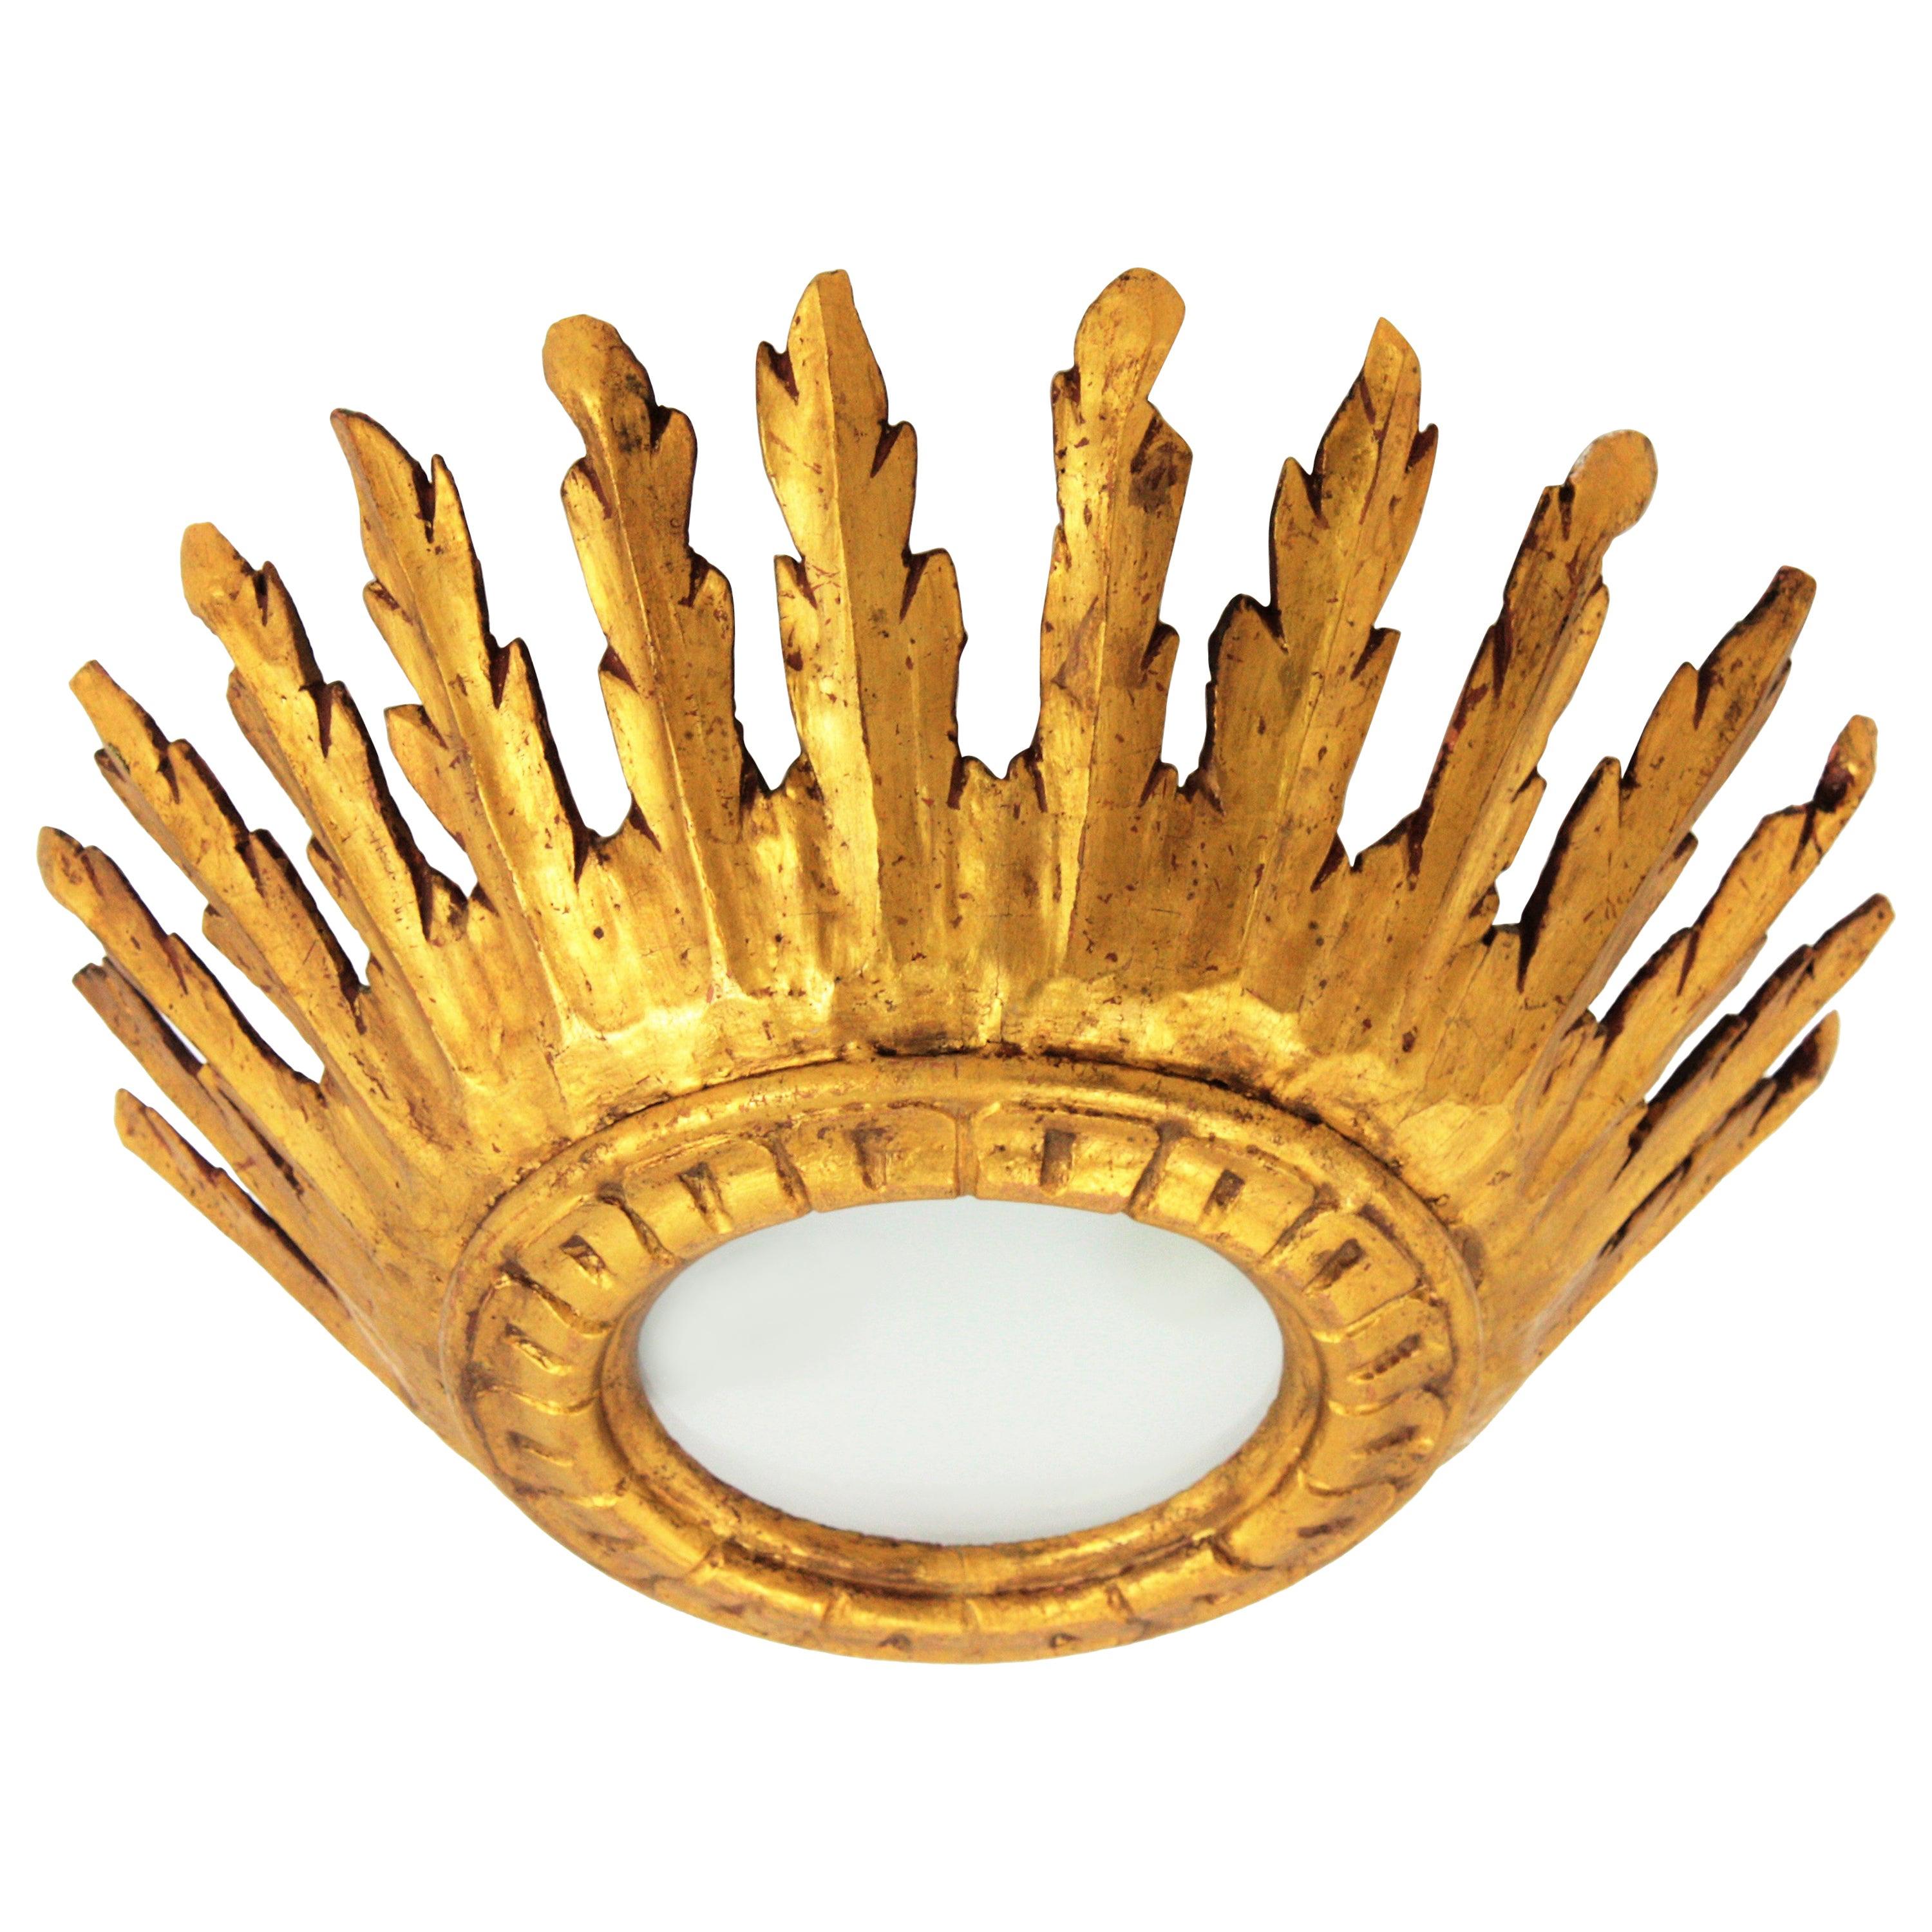 Spanish Baroque Giltwood Crown Sunburst Ceiling Light Fixture with Frosted Glass